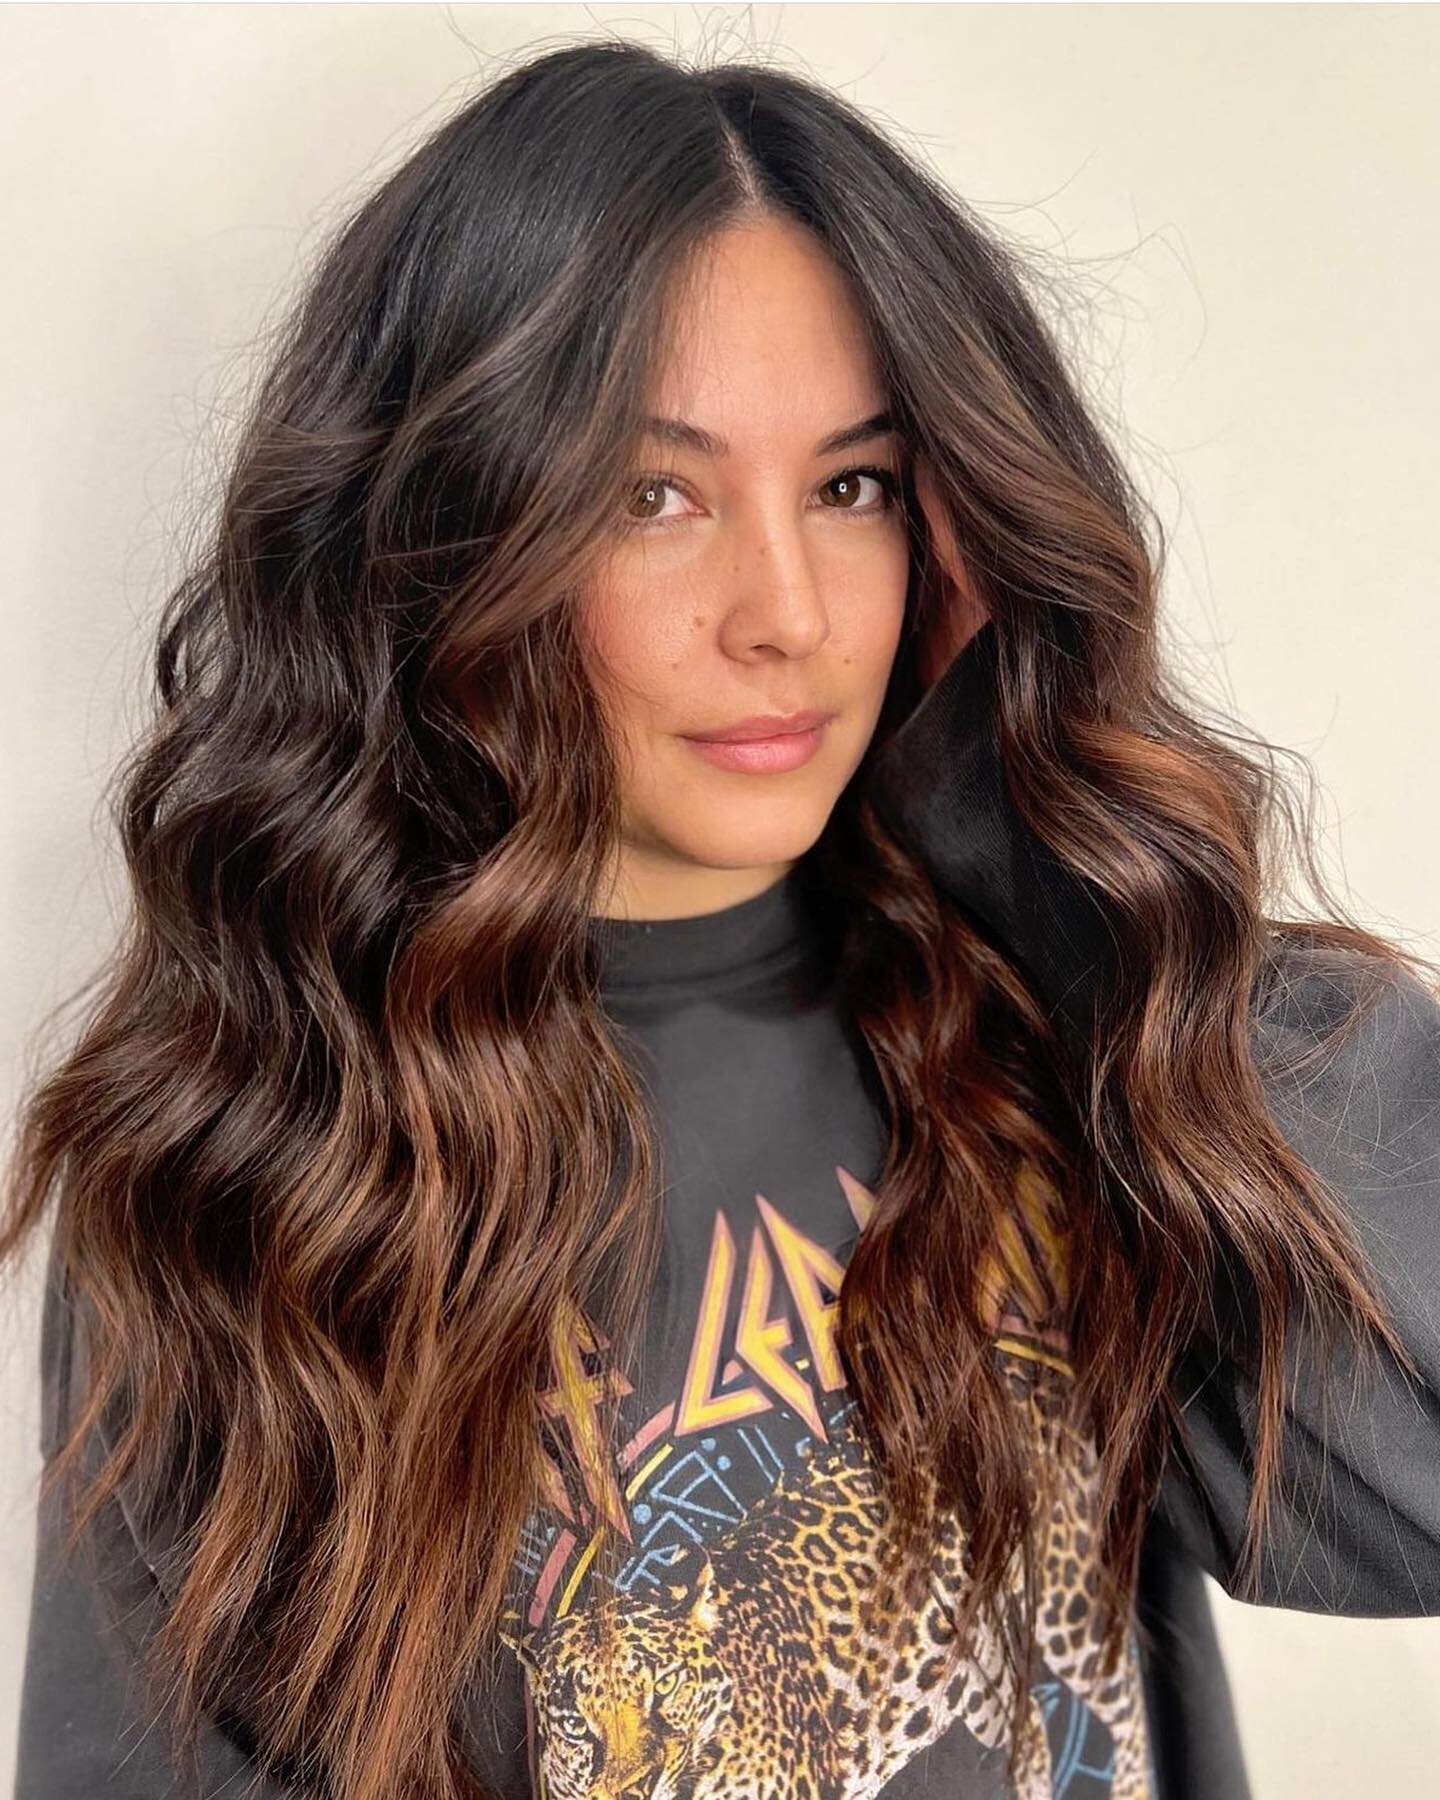 Soft undone #XOStyling wave dreams by @rebelsandroguesparlour 🖤